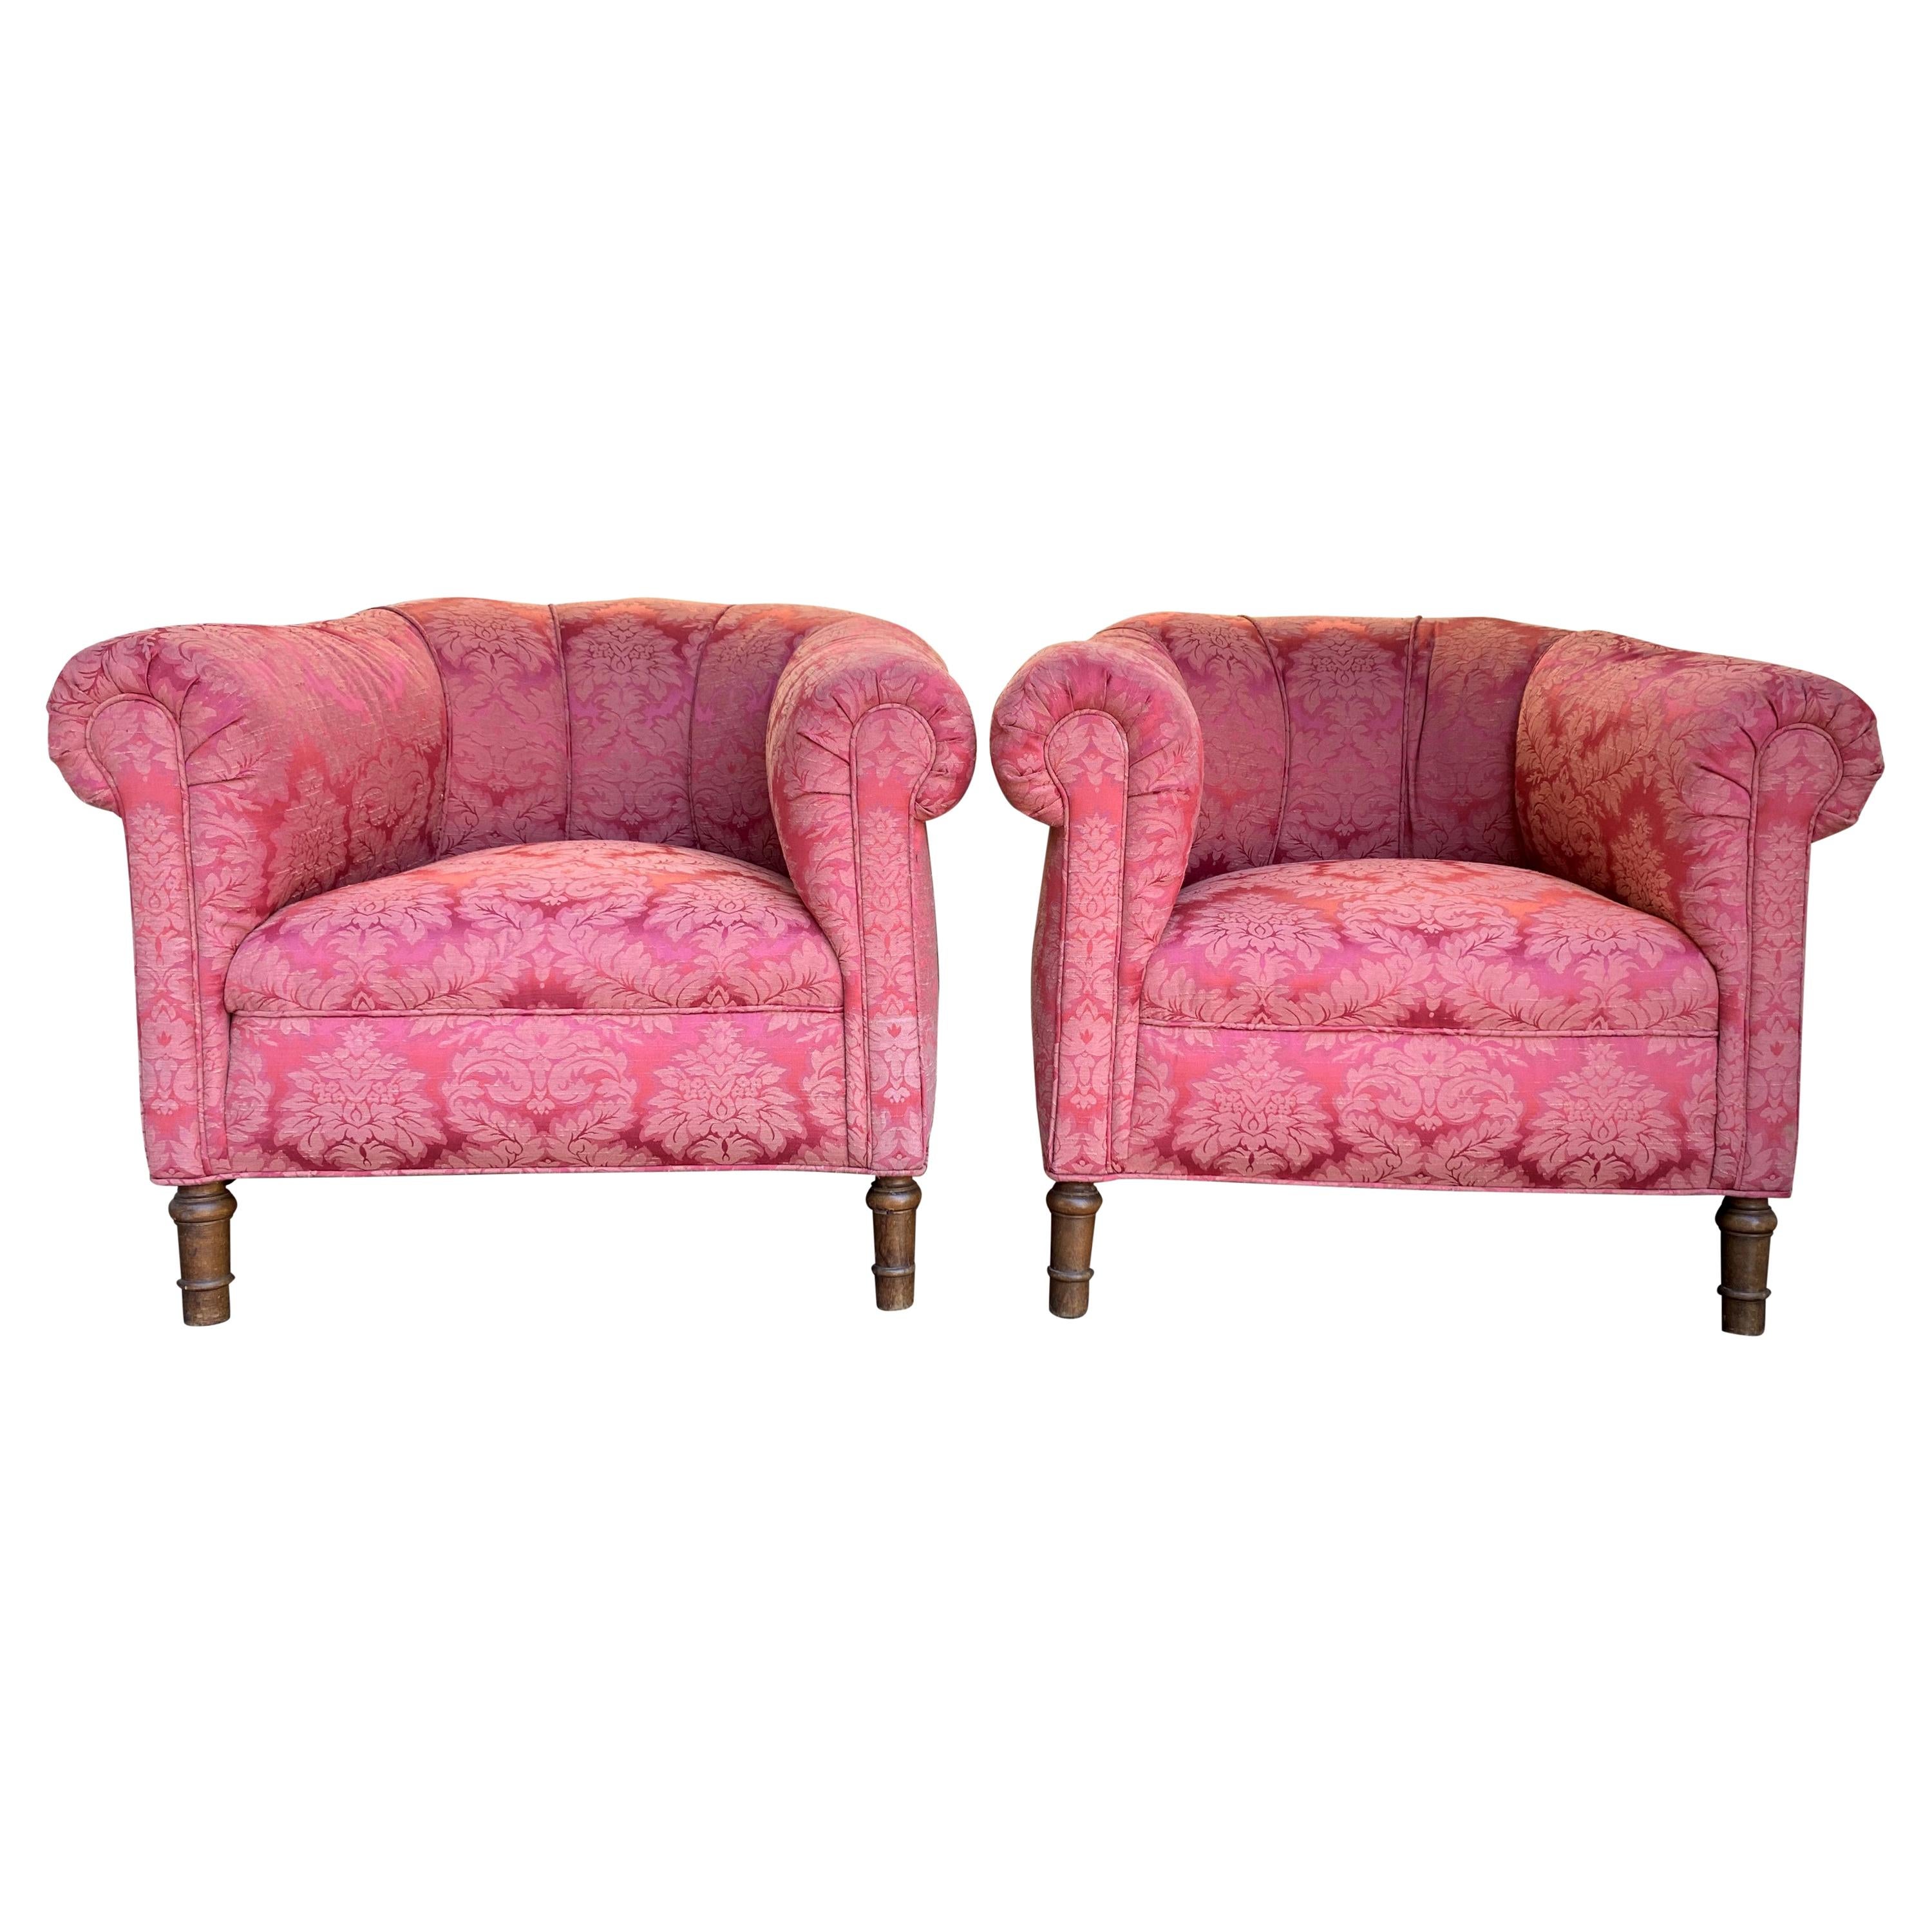 Pair of 1920s Club Chairs in Damask Floral Design For Sale